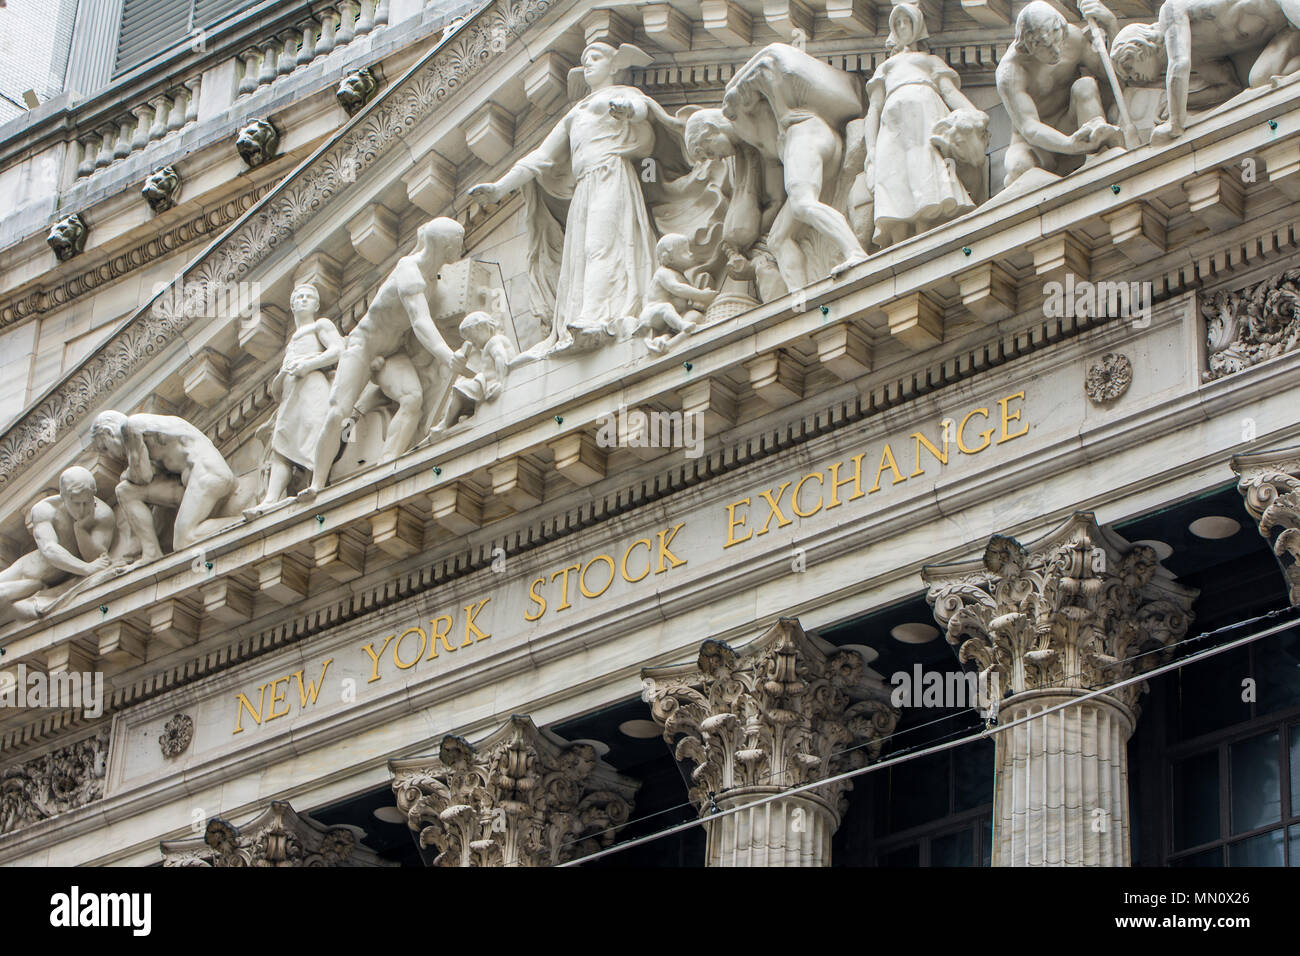 New York, US - March 29, 2018:  The front facade and sign of the New York Stock Exchange at wall street Stock Photo